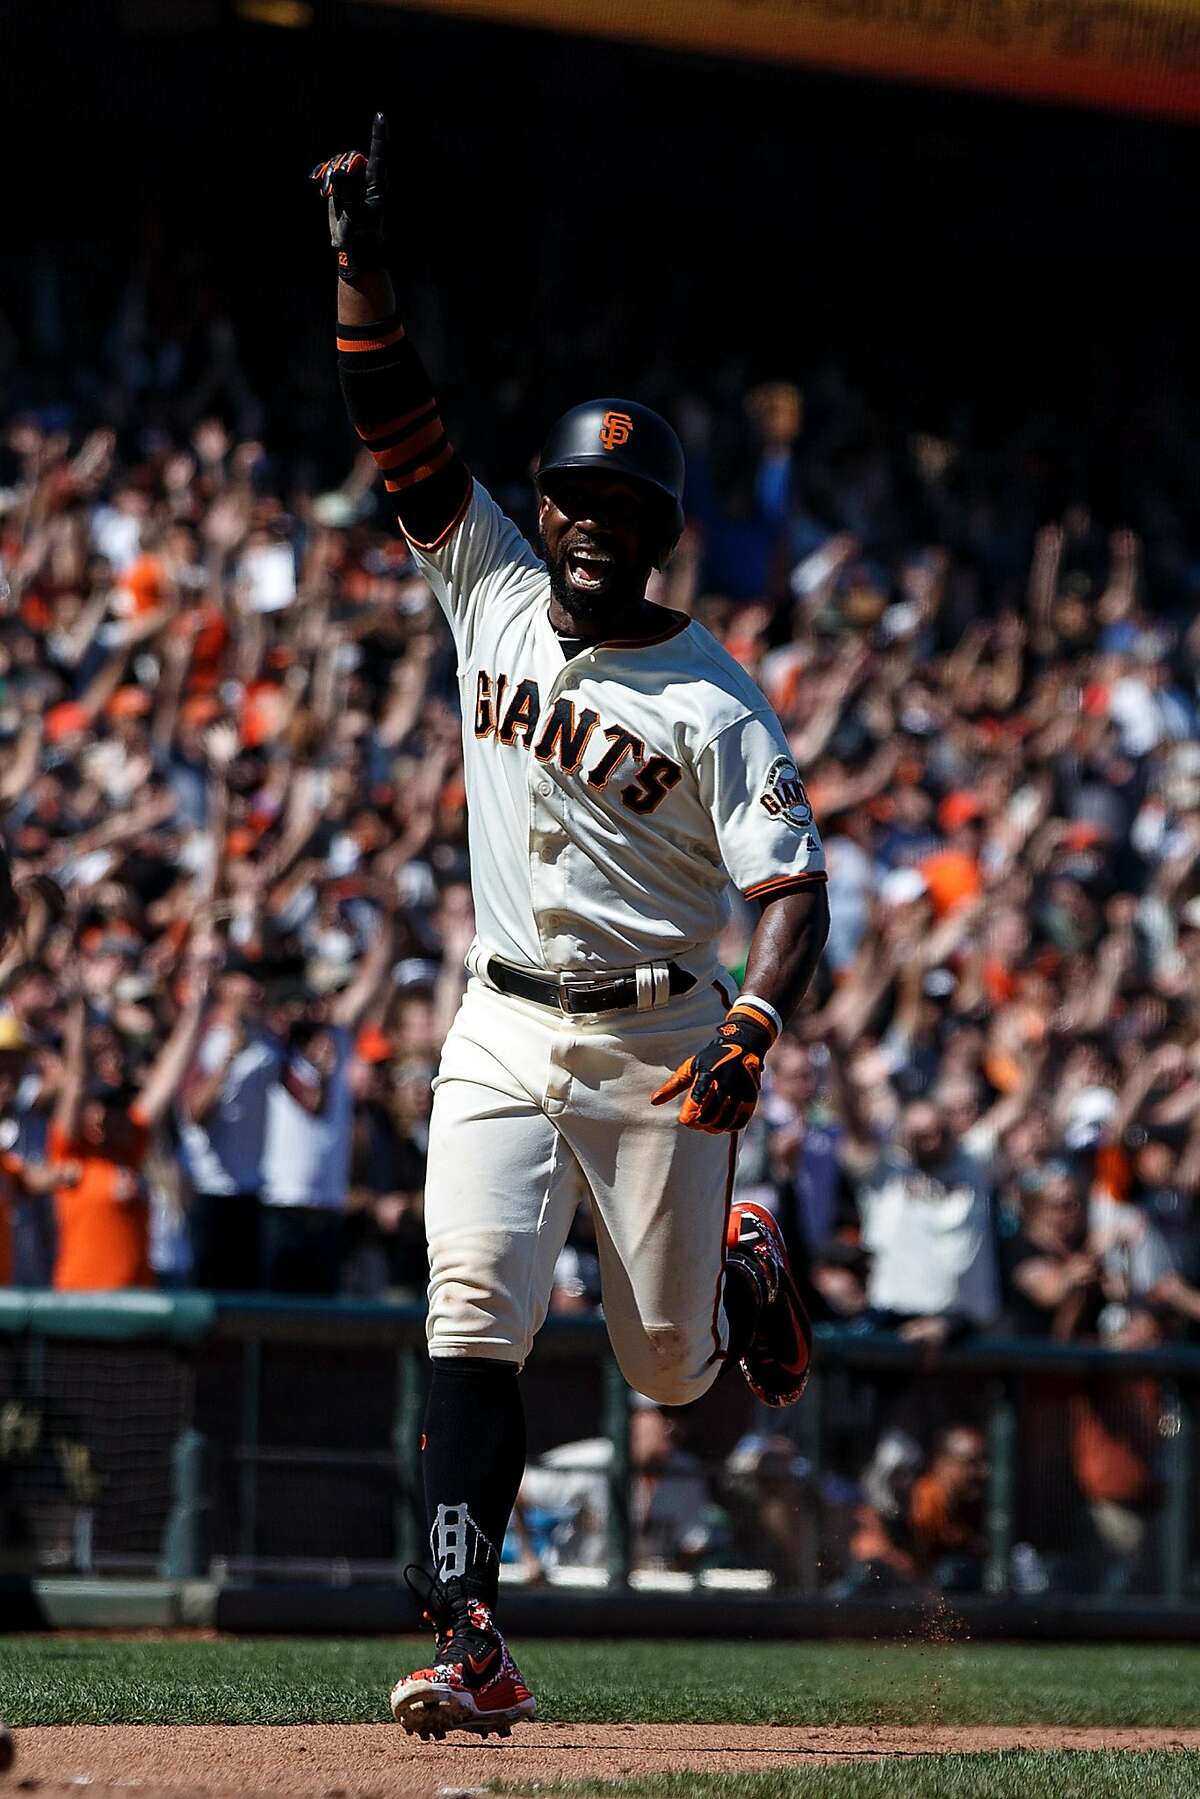 SAN FRANCISCO, CA - JUNE 24: Andrew McCutchen #22 of the San Francisco Giants celebrates while scoring on a two run walk off double by Hunter Pence (not pictured) against the San Diego Padres during the eleventh inning at AT&T Park on June 24, 2018 in San Francisco, California. The San Francisco Giants defeated the San Diego Padres 3-2 in 11 innings. (Photo by Jason O. Watson/Getty Images)